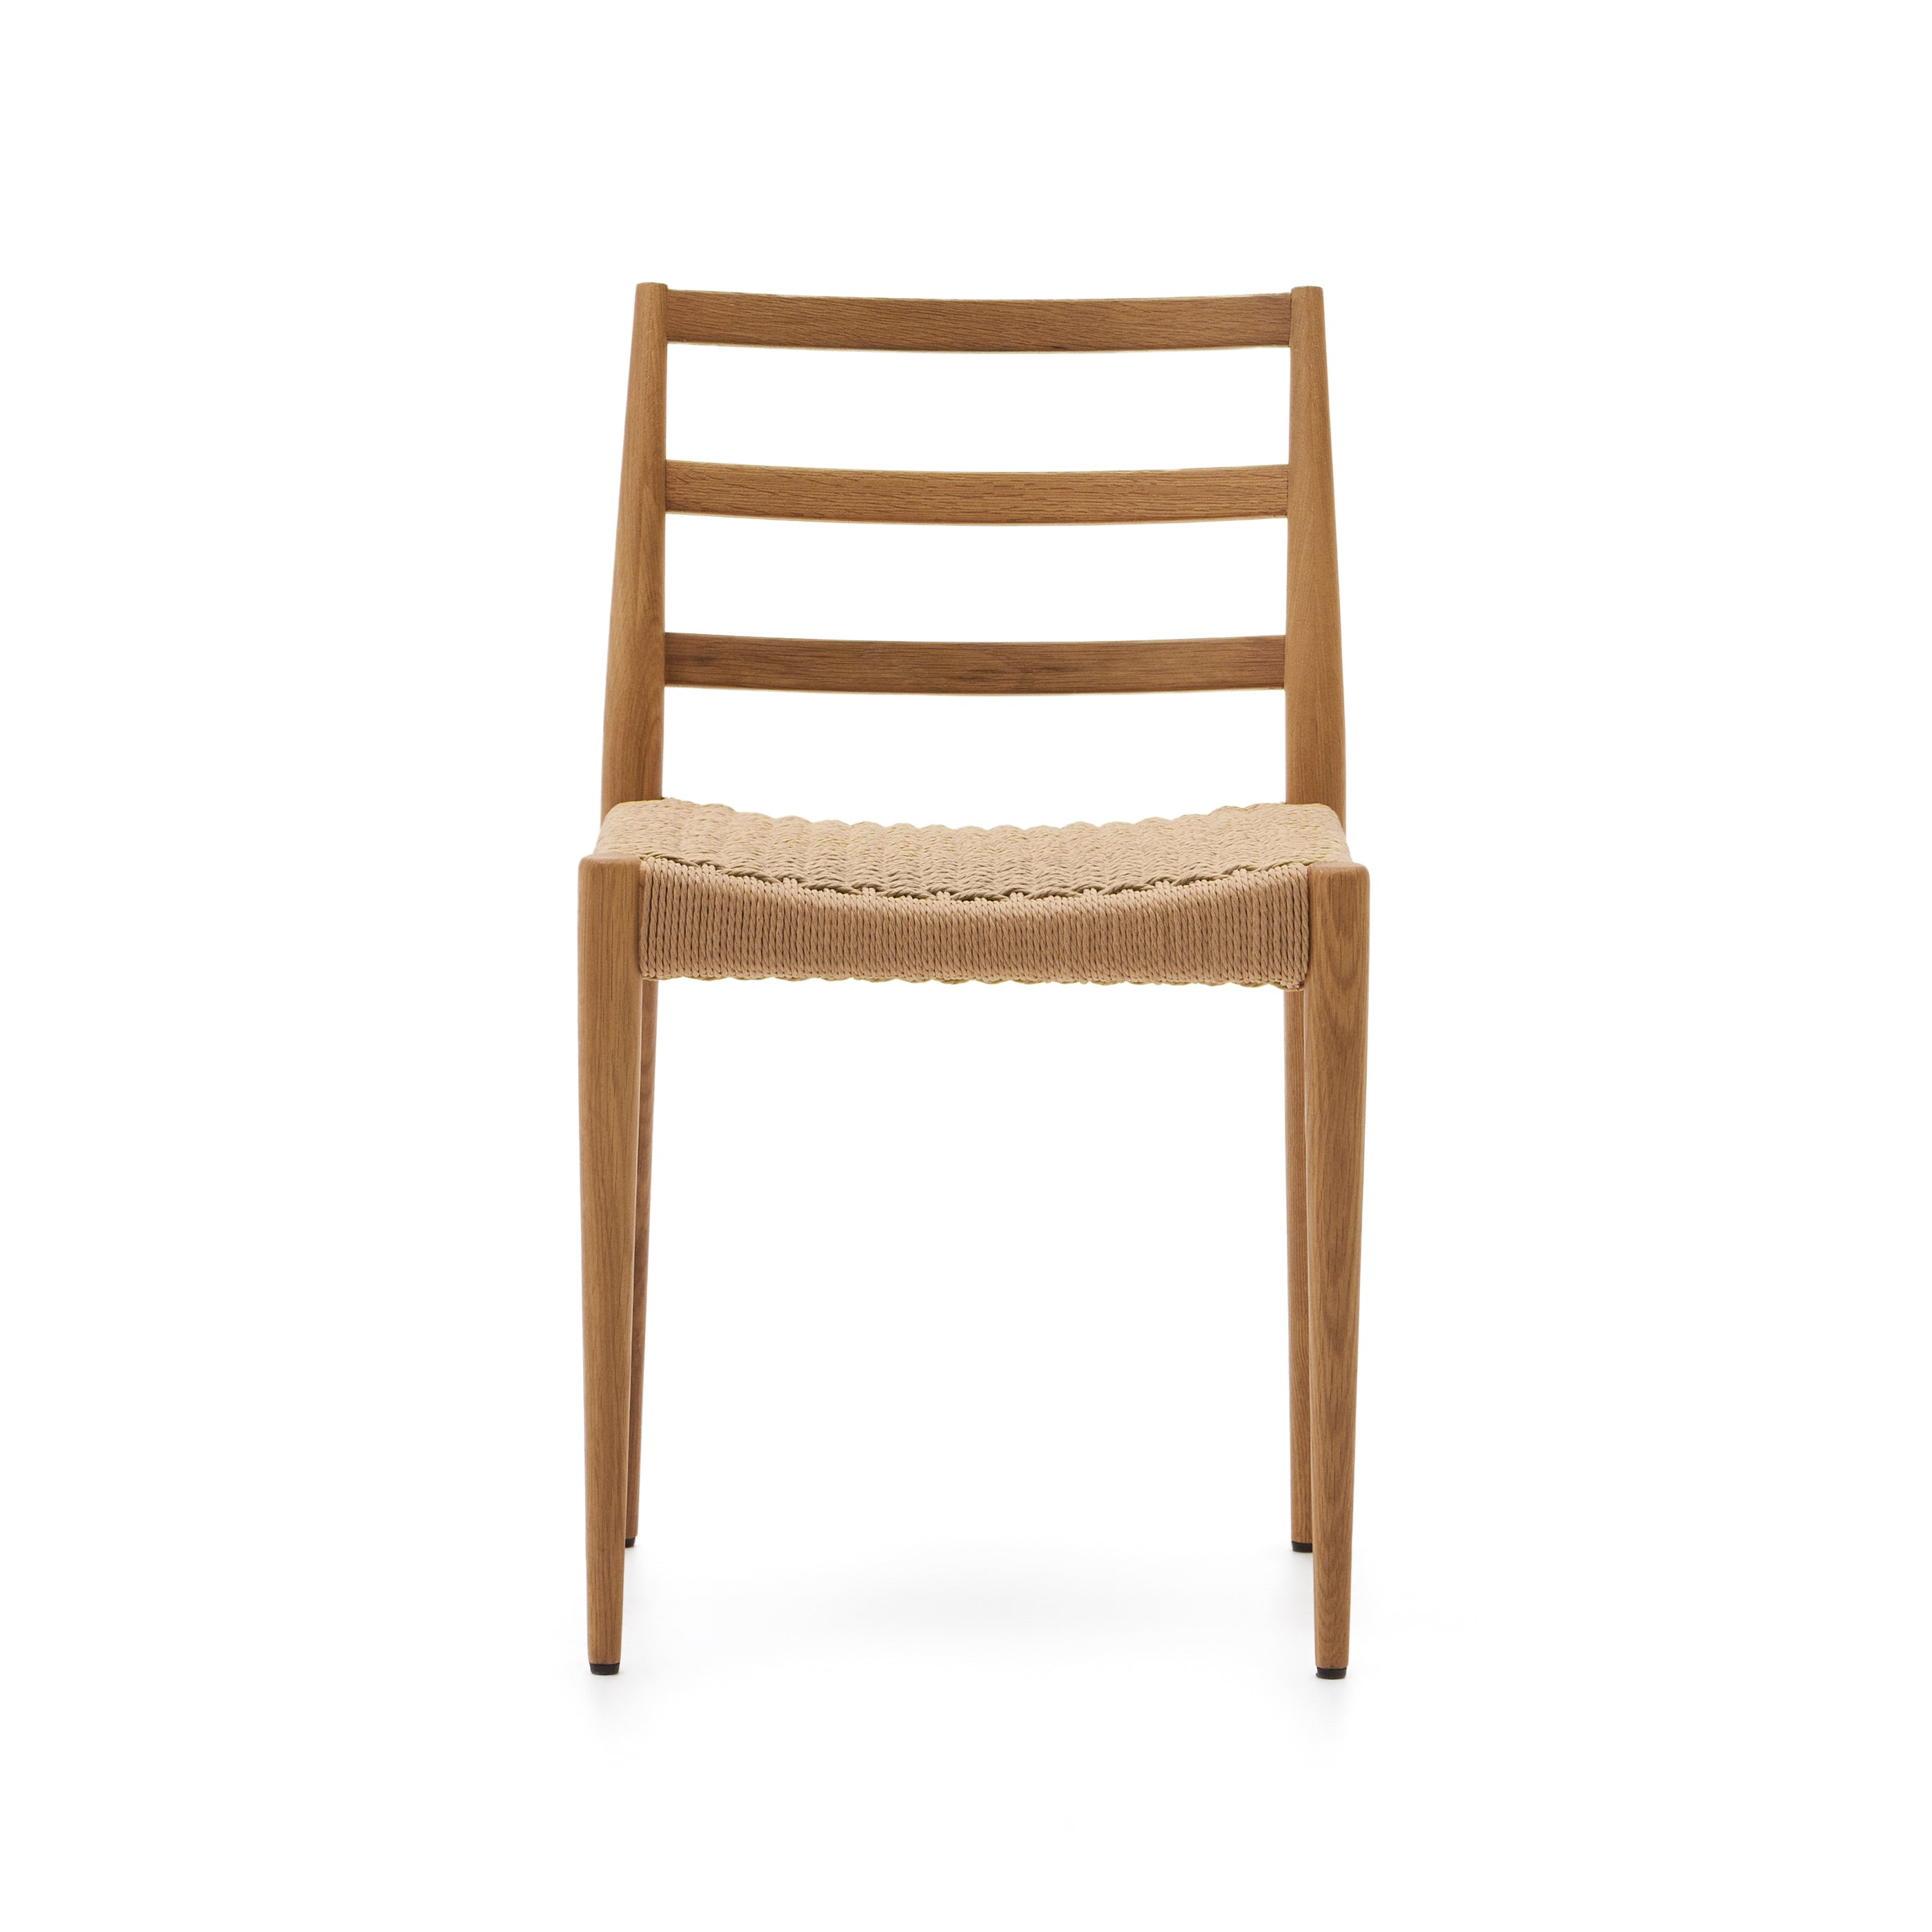 Analy chair in solid oak FSC 100% with natural finish and rope seat